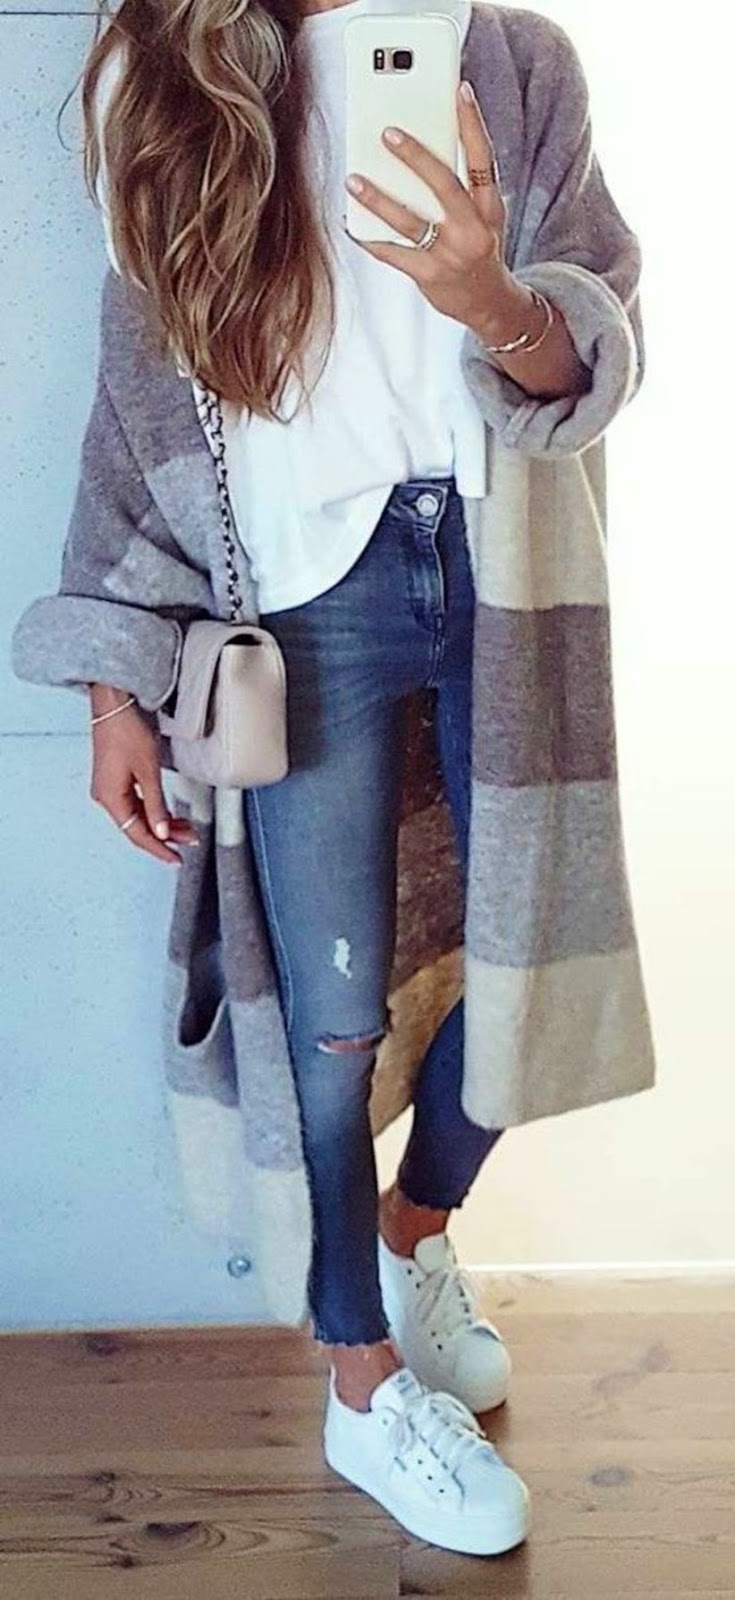 trendy winter outfit / sneakers + skinnies + bag + white top + cashmere cardigan